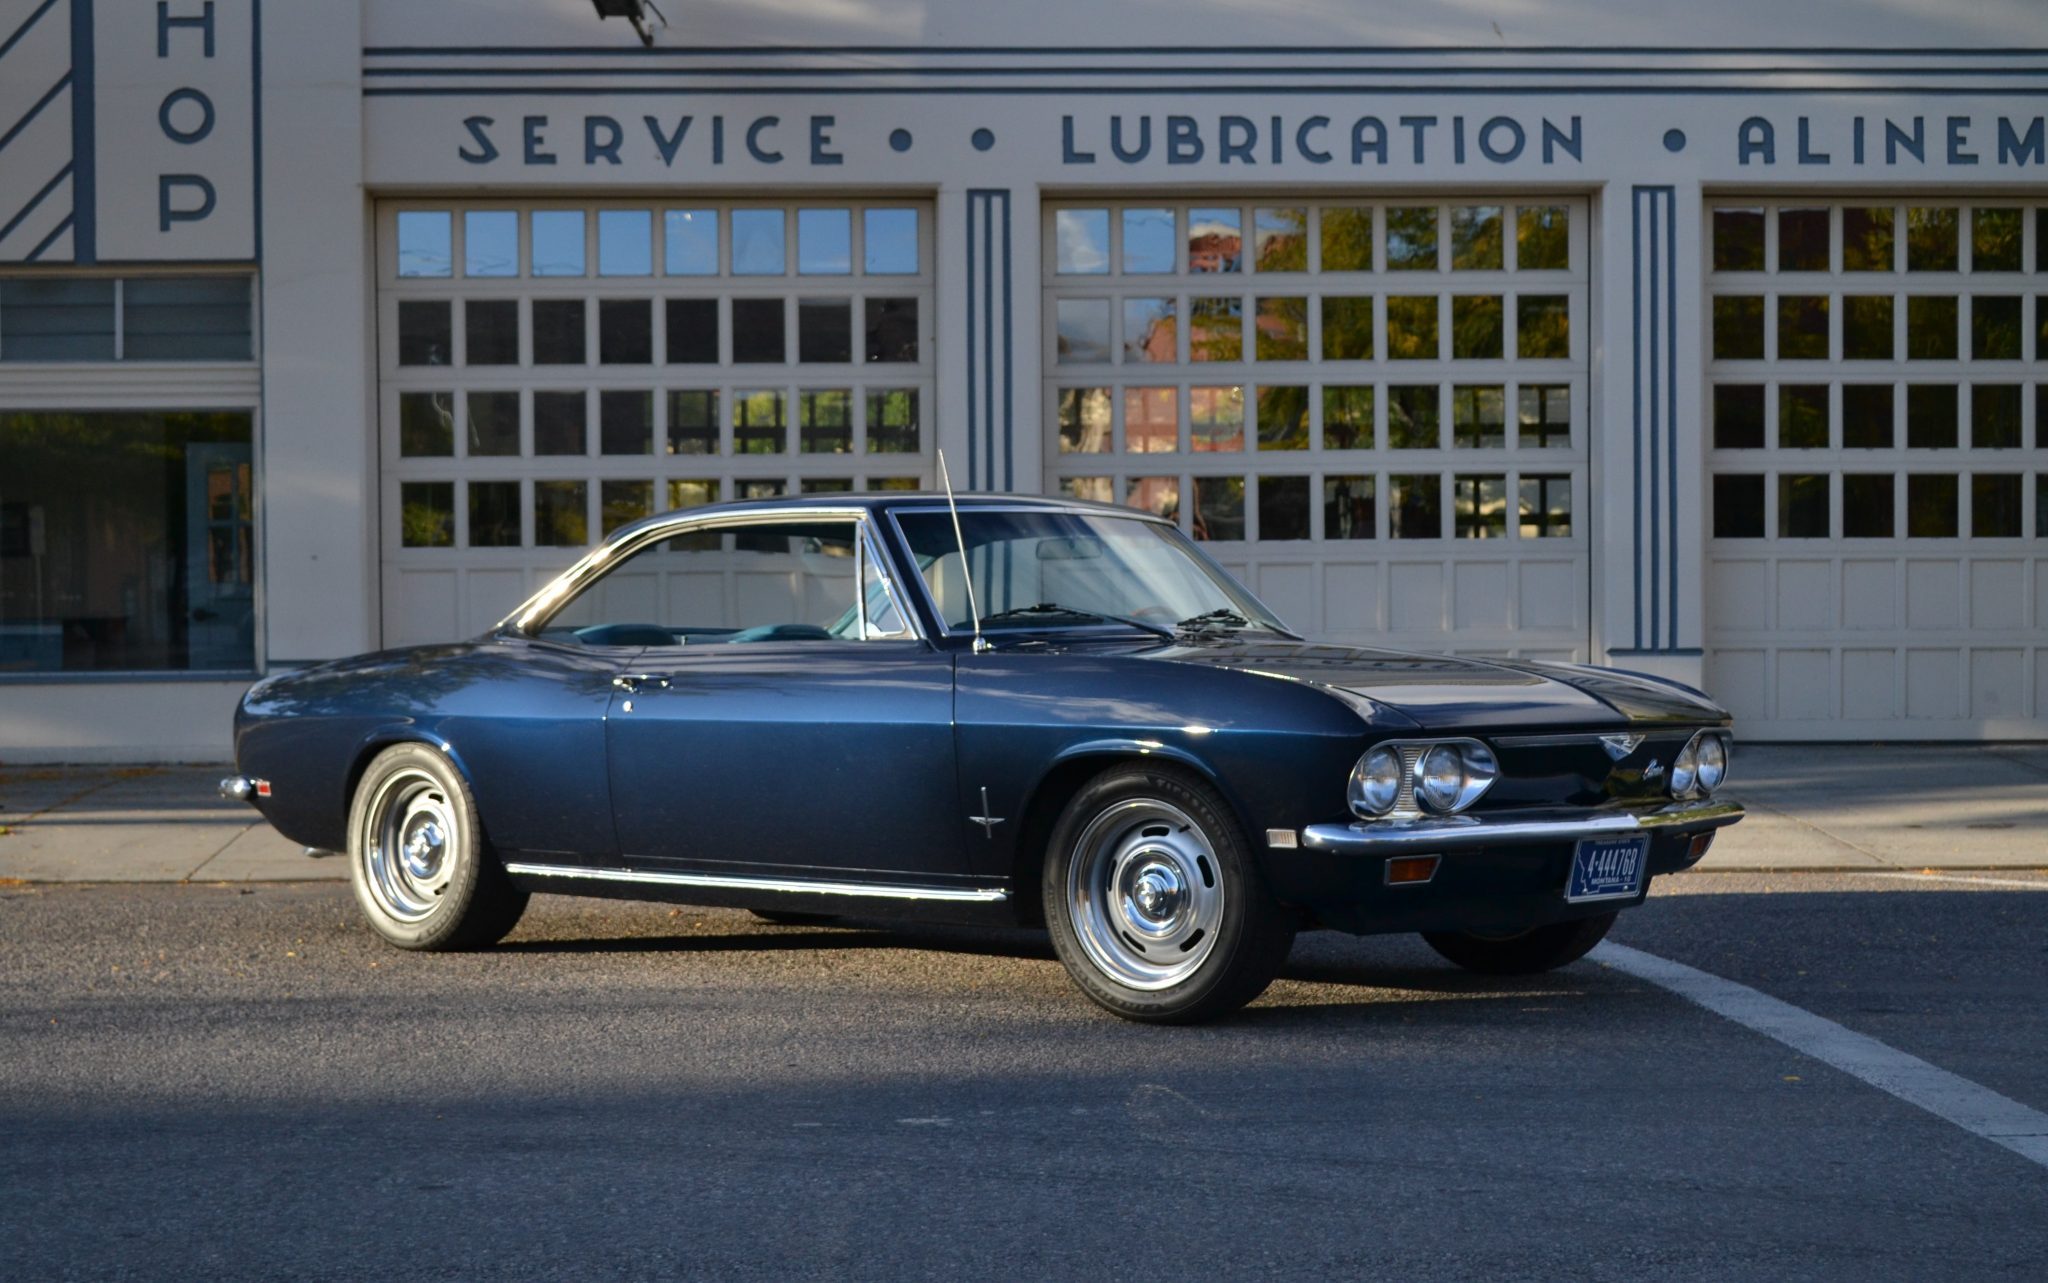 This 1968 Chevrolet Corvair Monza Coupe Blends Classic Style With Flat